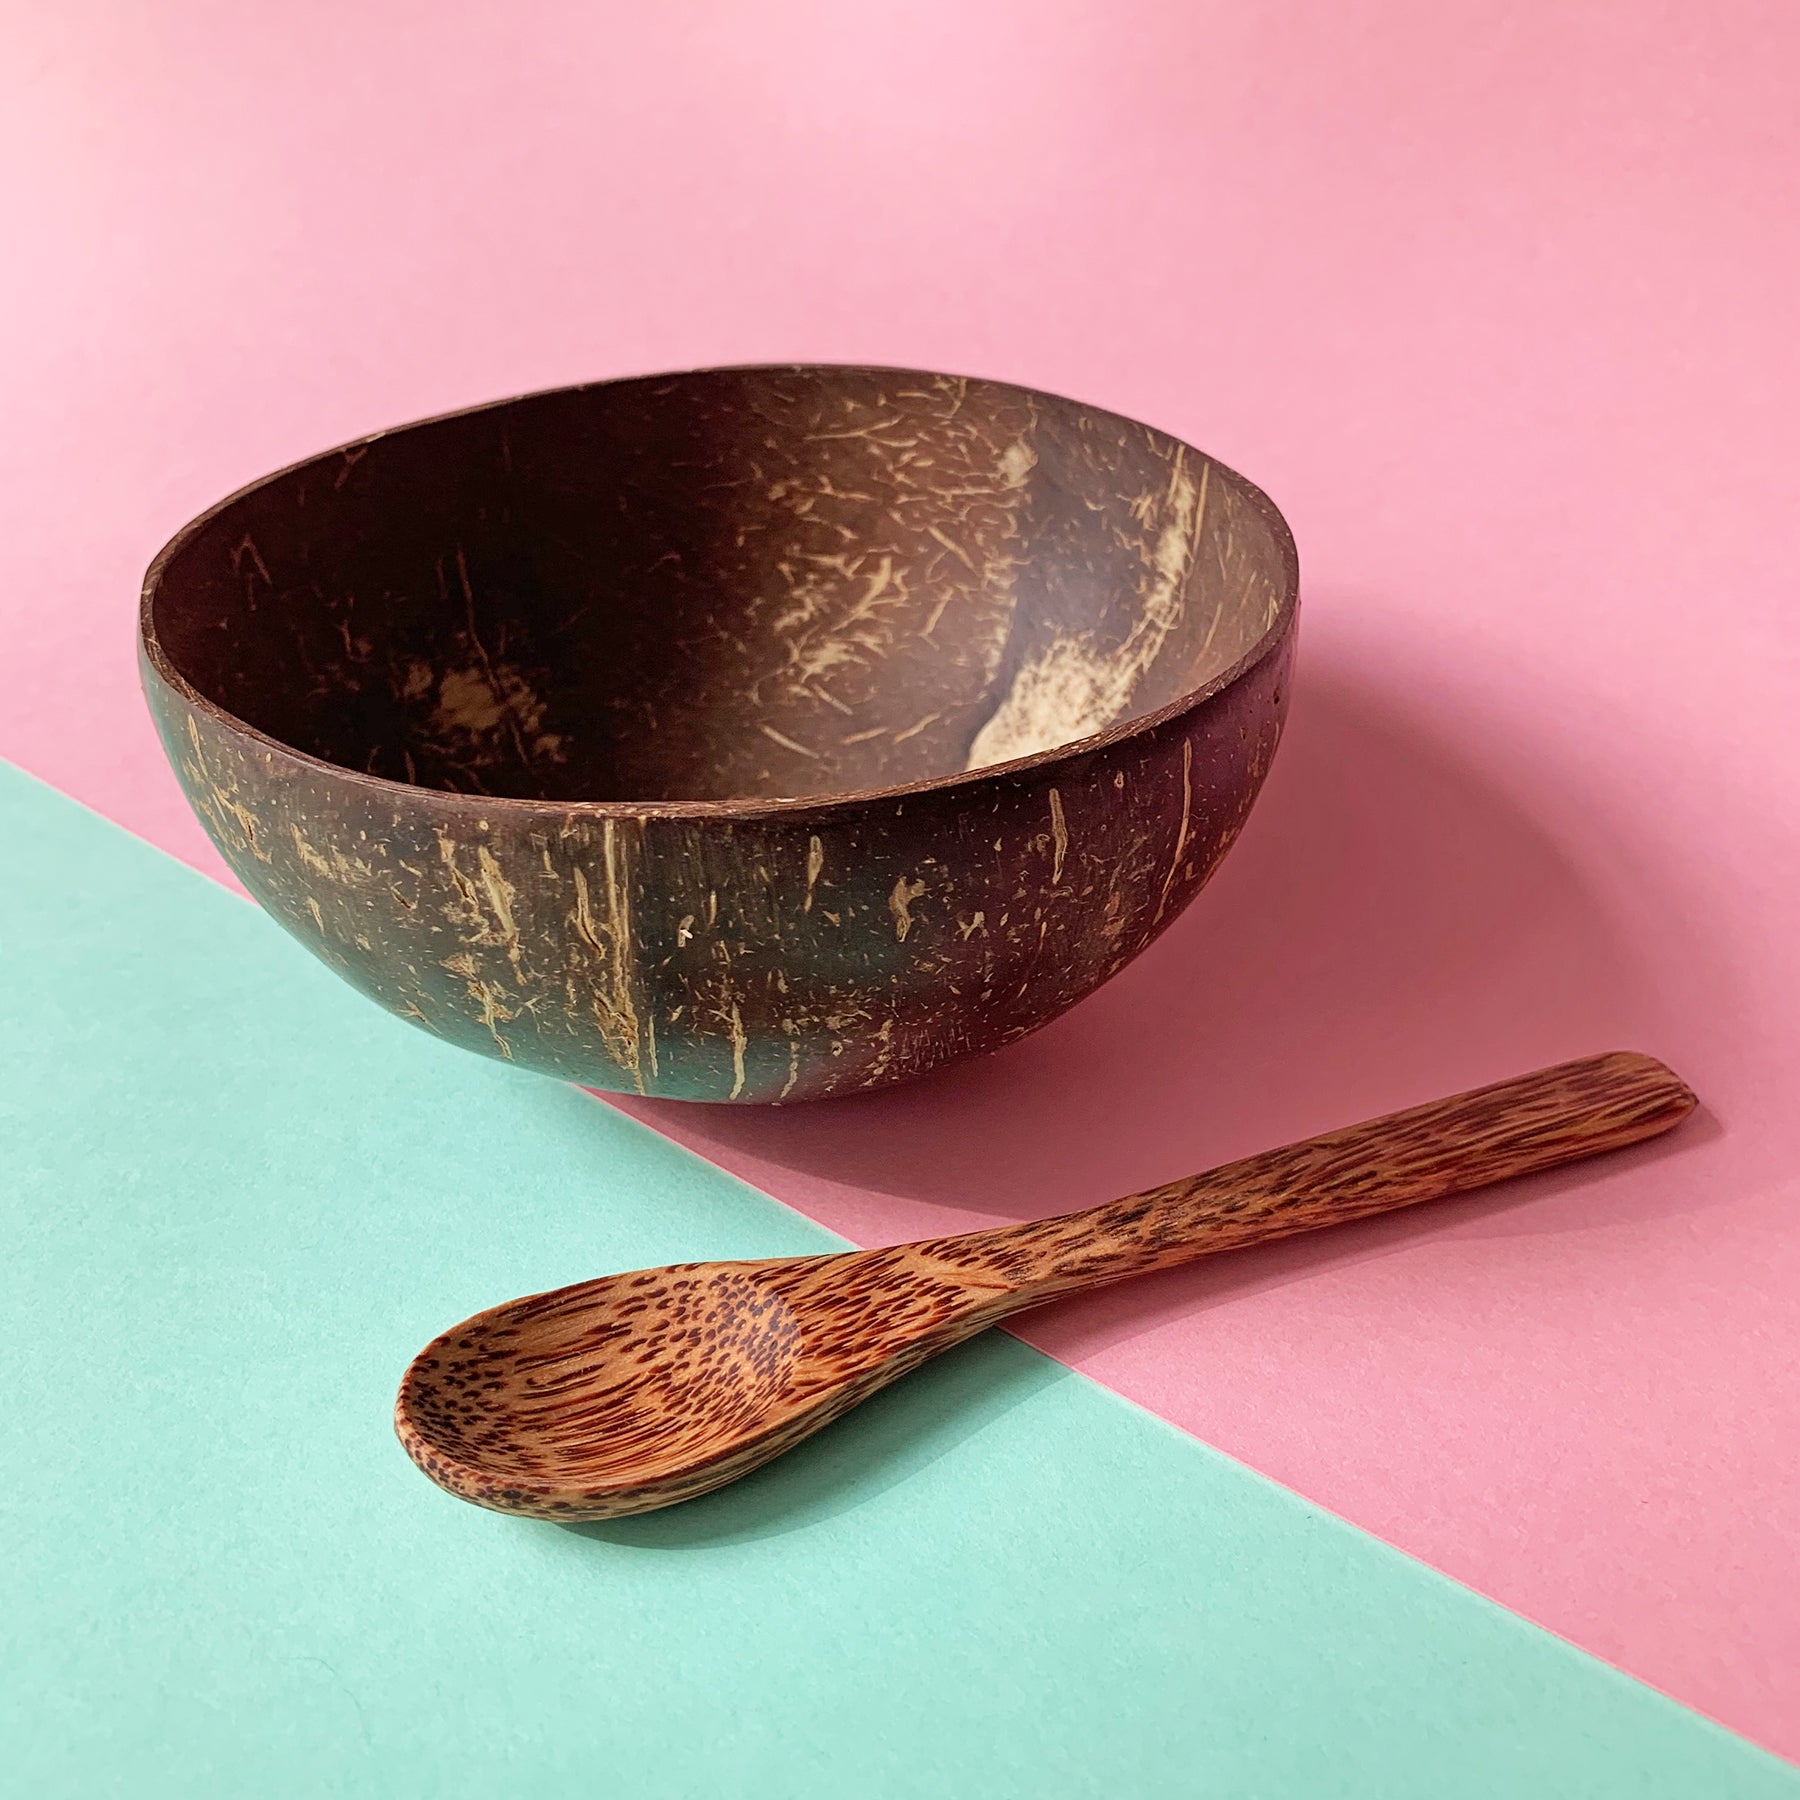 Coconut wood spoon with coconut bowl